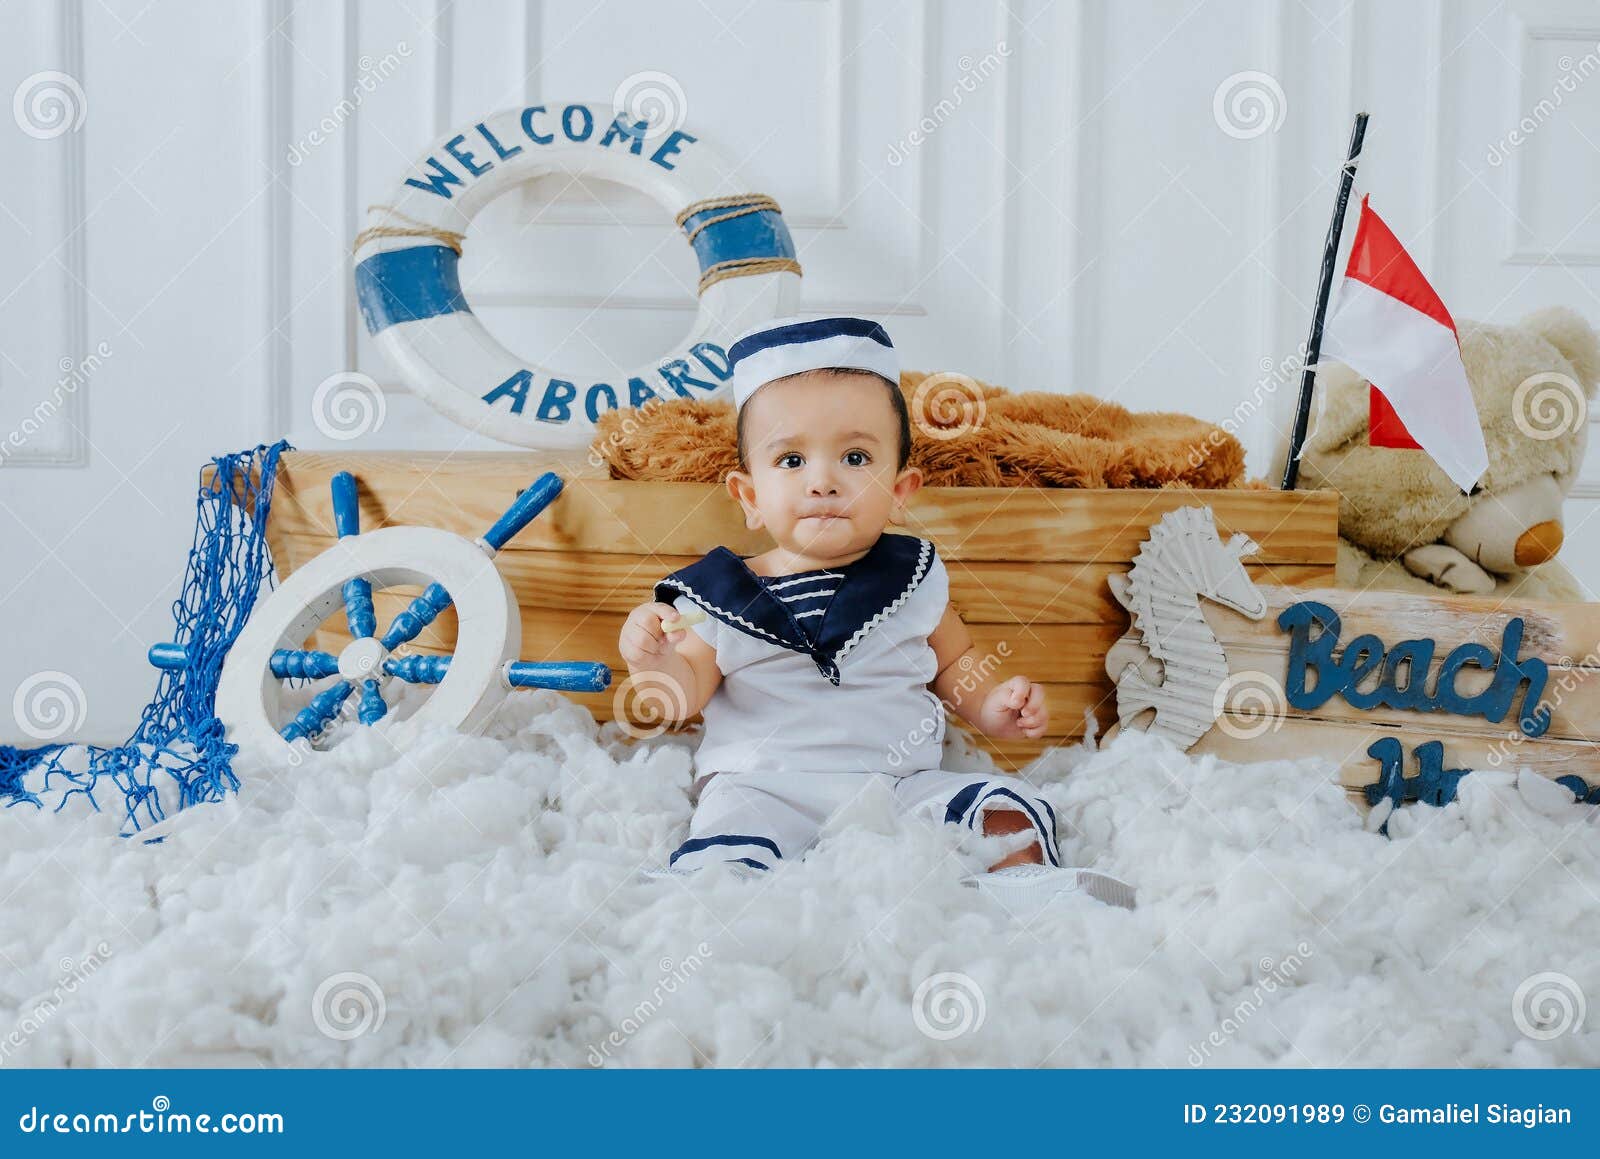 460+ Baby Boy Sailor Outfit Stock Photos, Pictures & Royalty-Free